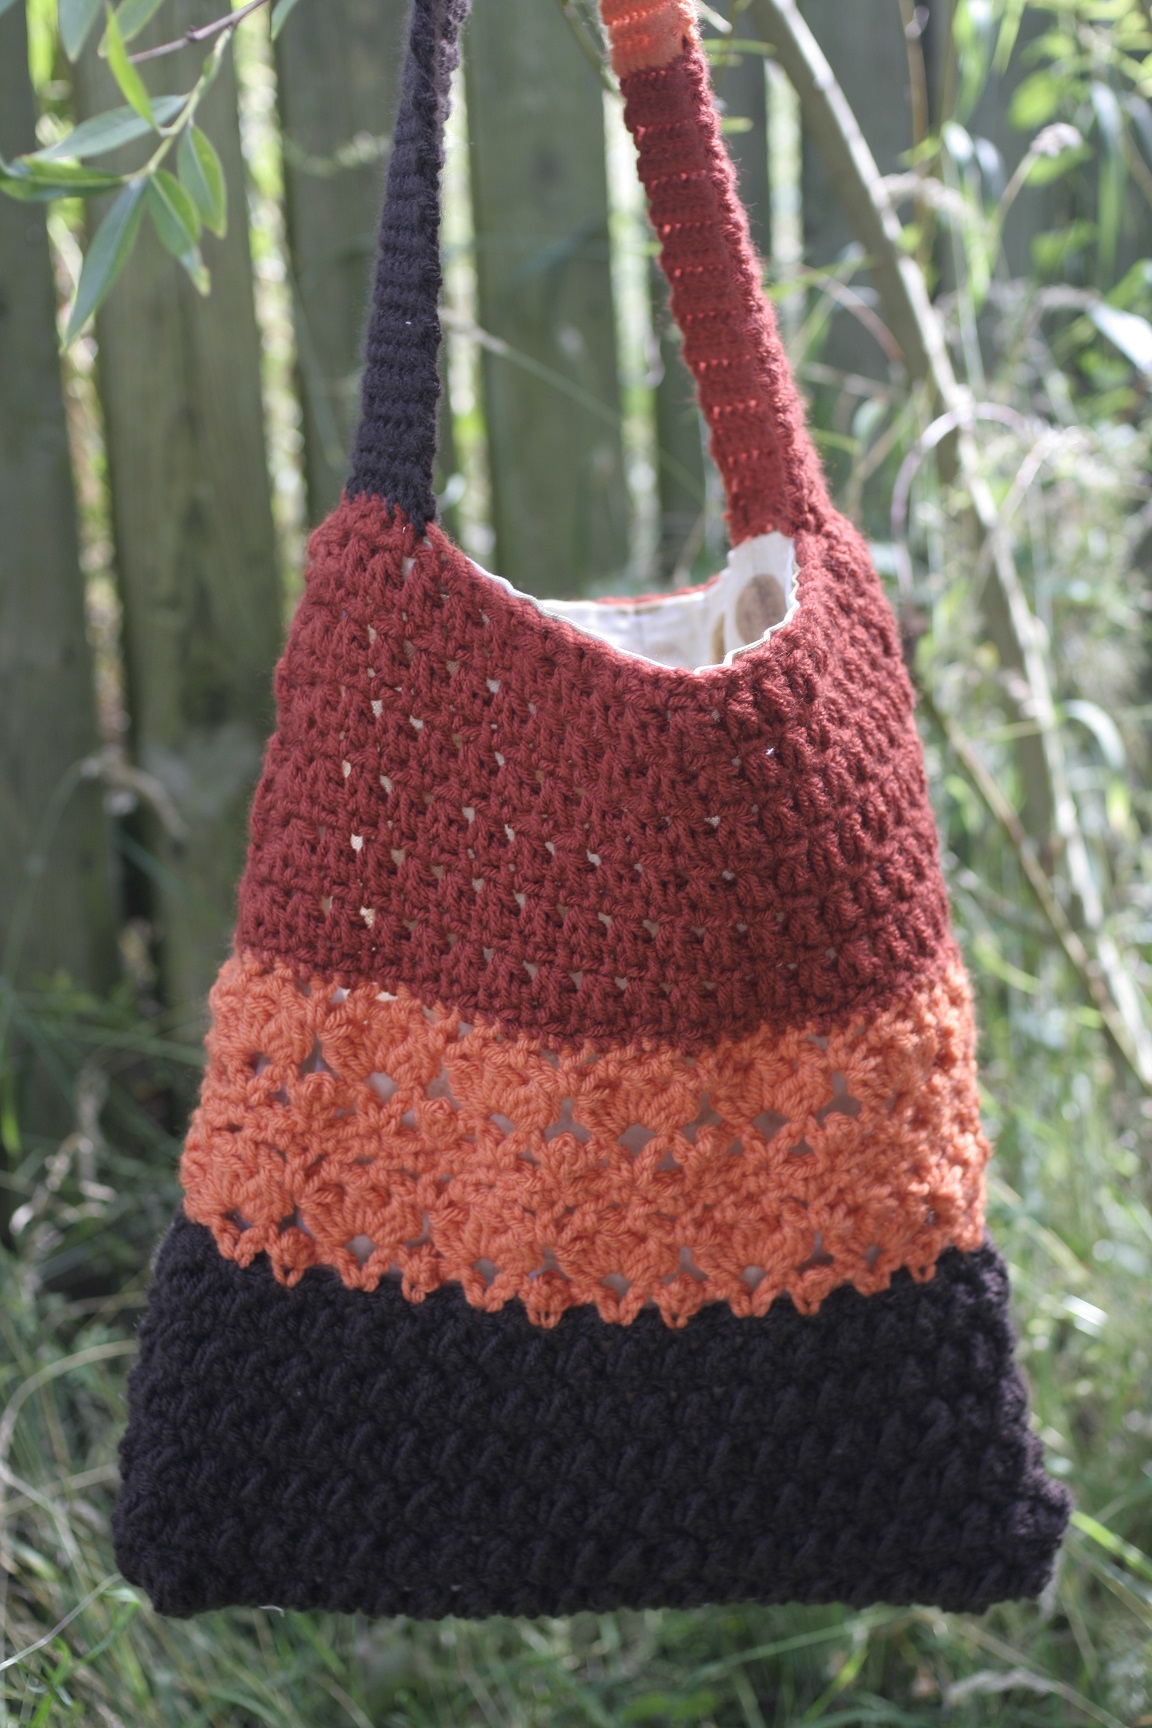 Lace Shoulder Bag – FREE PATTERN! – Catkin and Comet